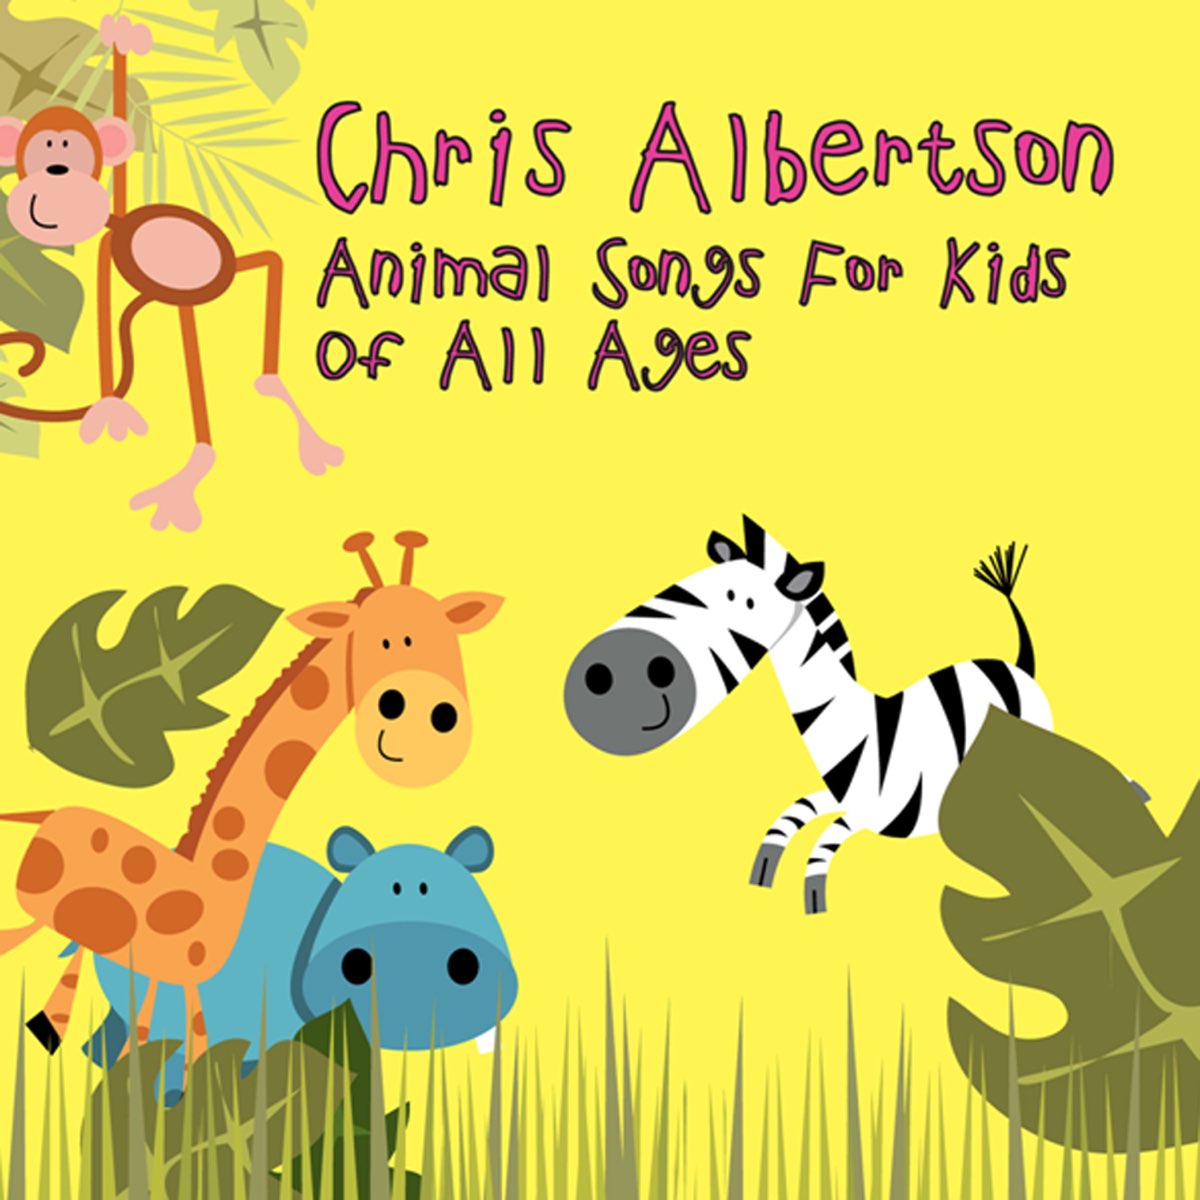 Animal Songs For Kids Of All Ages by Chris Albertson on Apple Music